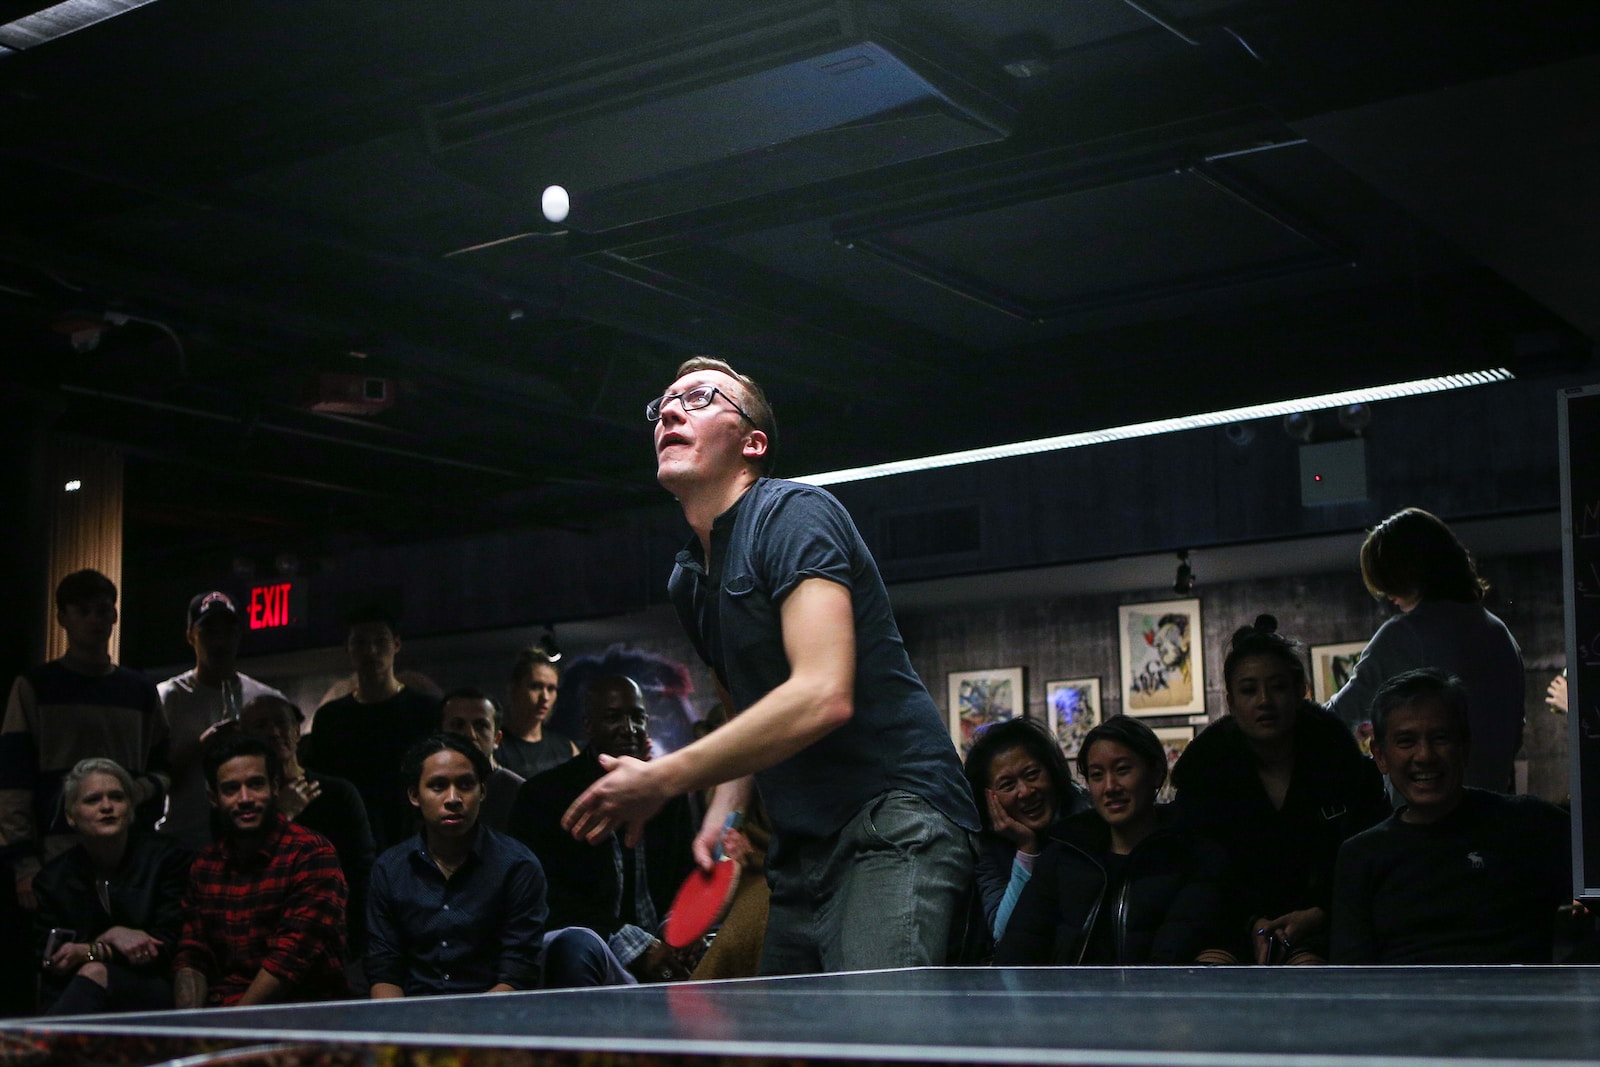 man about to paddle ping pong ball surrounded by group of people